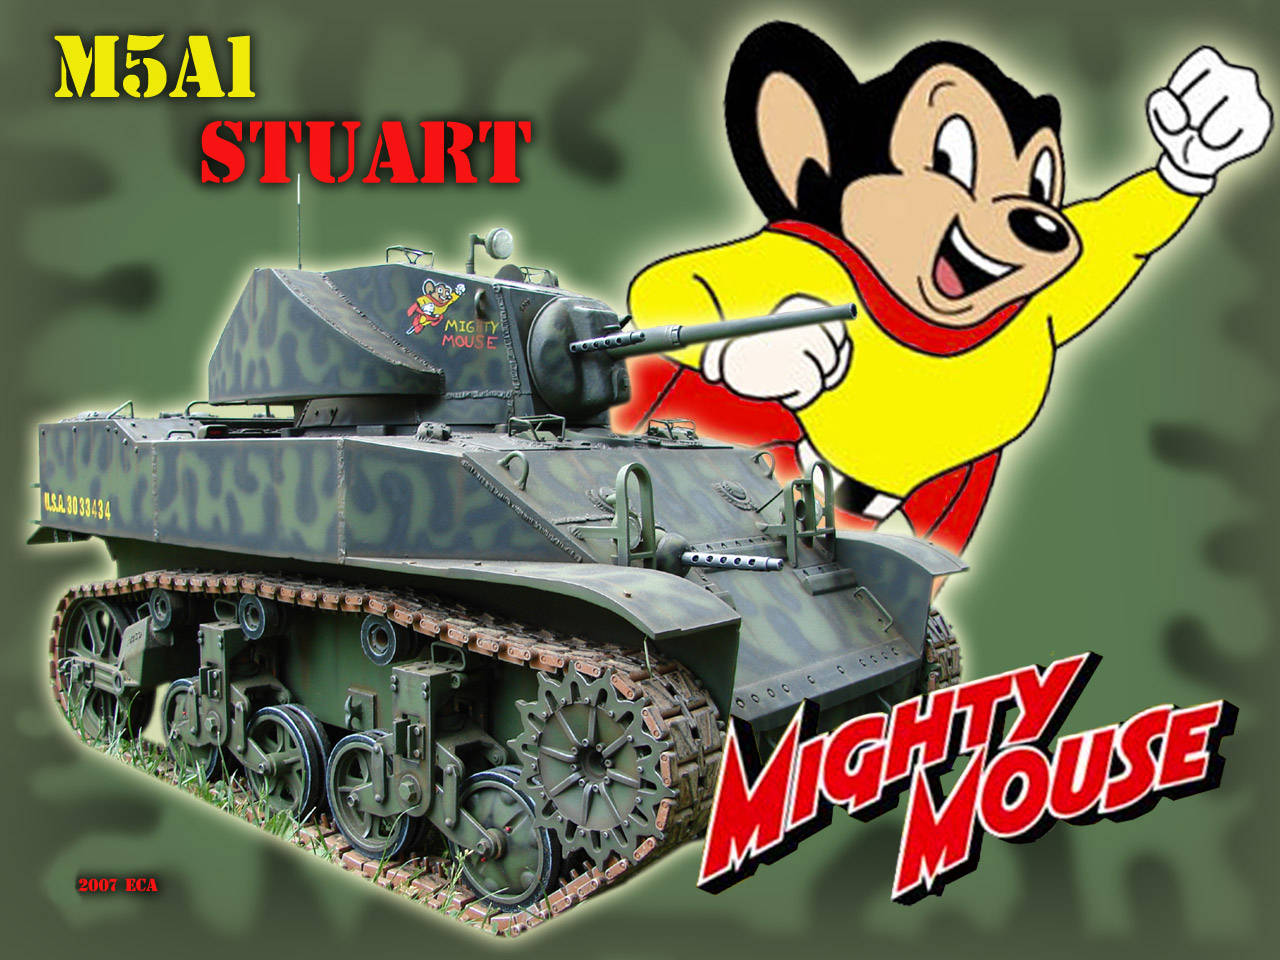 Mighty Mouse With M5a1 Stuart